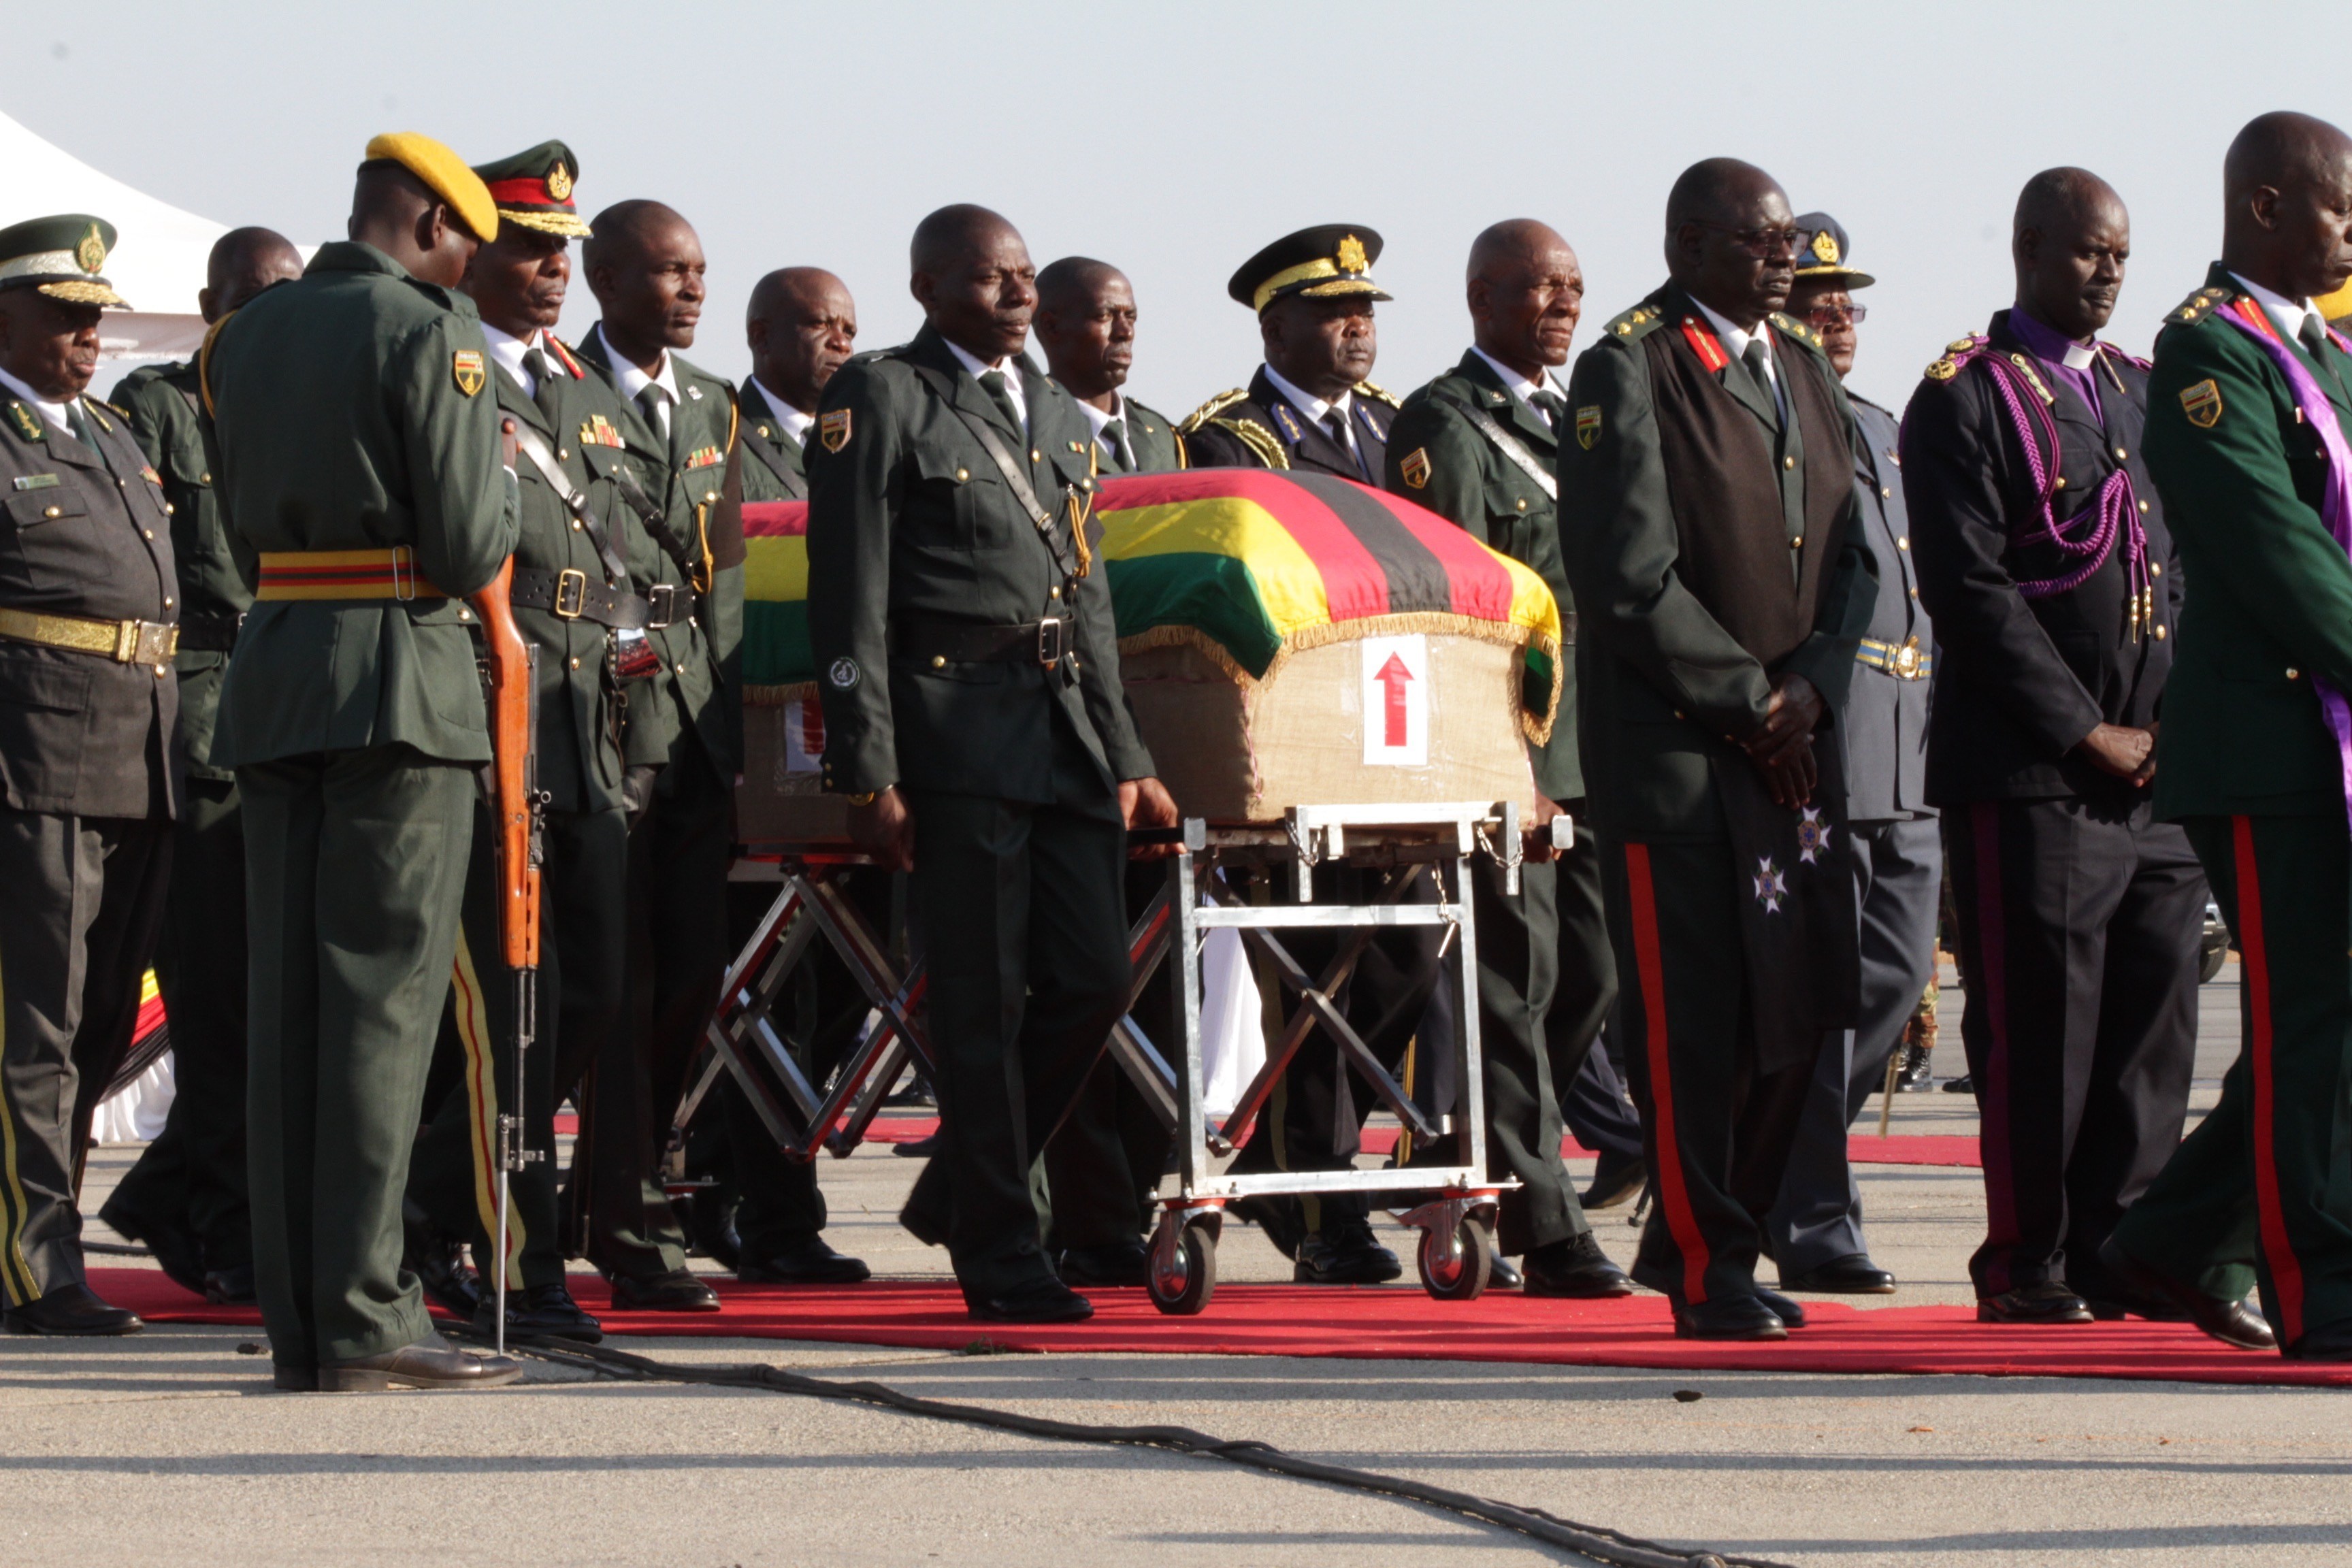 Robert Mugabe's body arrived home in Zimbabwe on Wednesday ahead of a state funeral